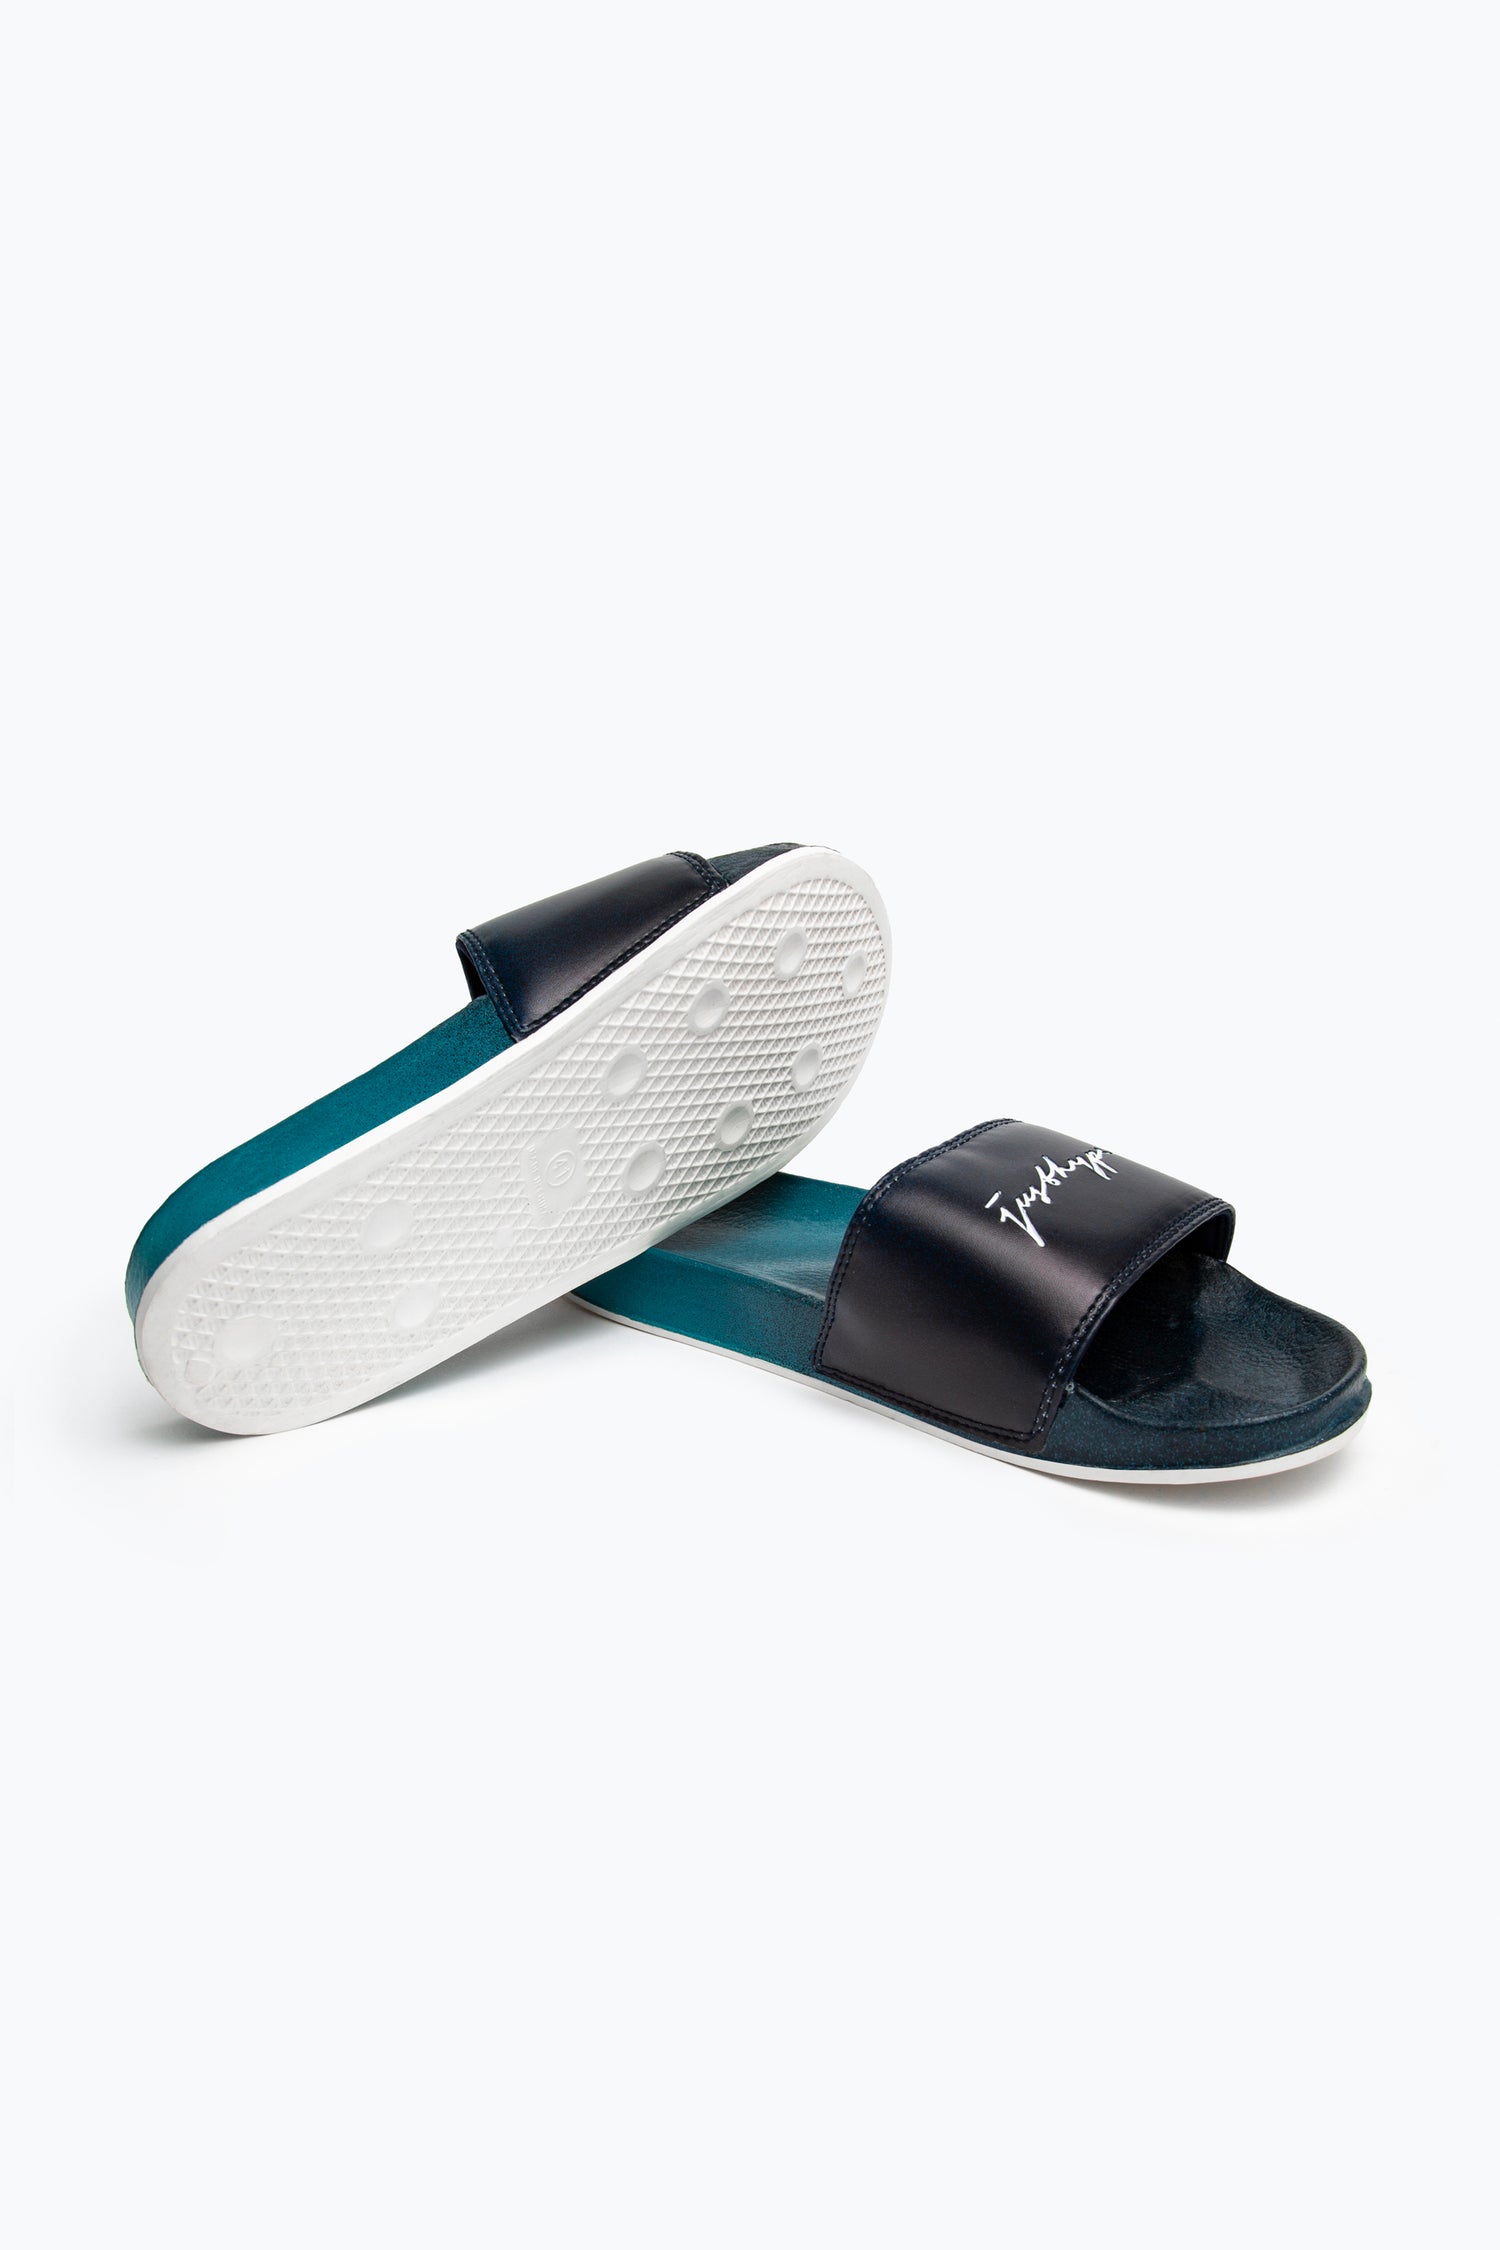 HYPE ADULT BLUE SPECKLE FADE SCRIBBLE SLIDERS